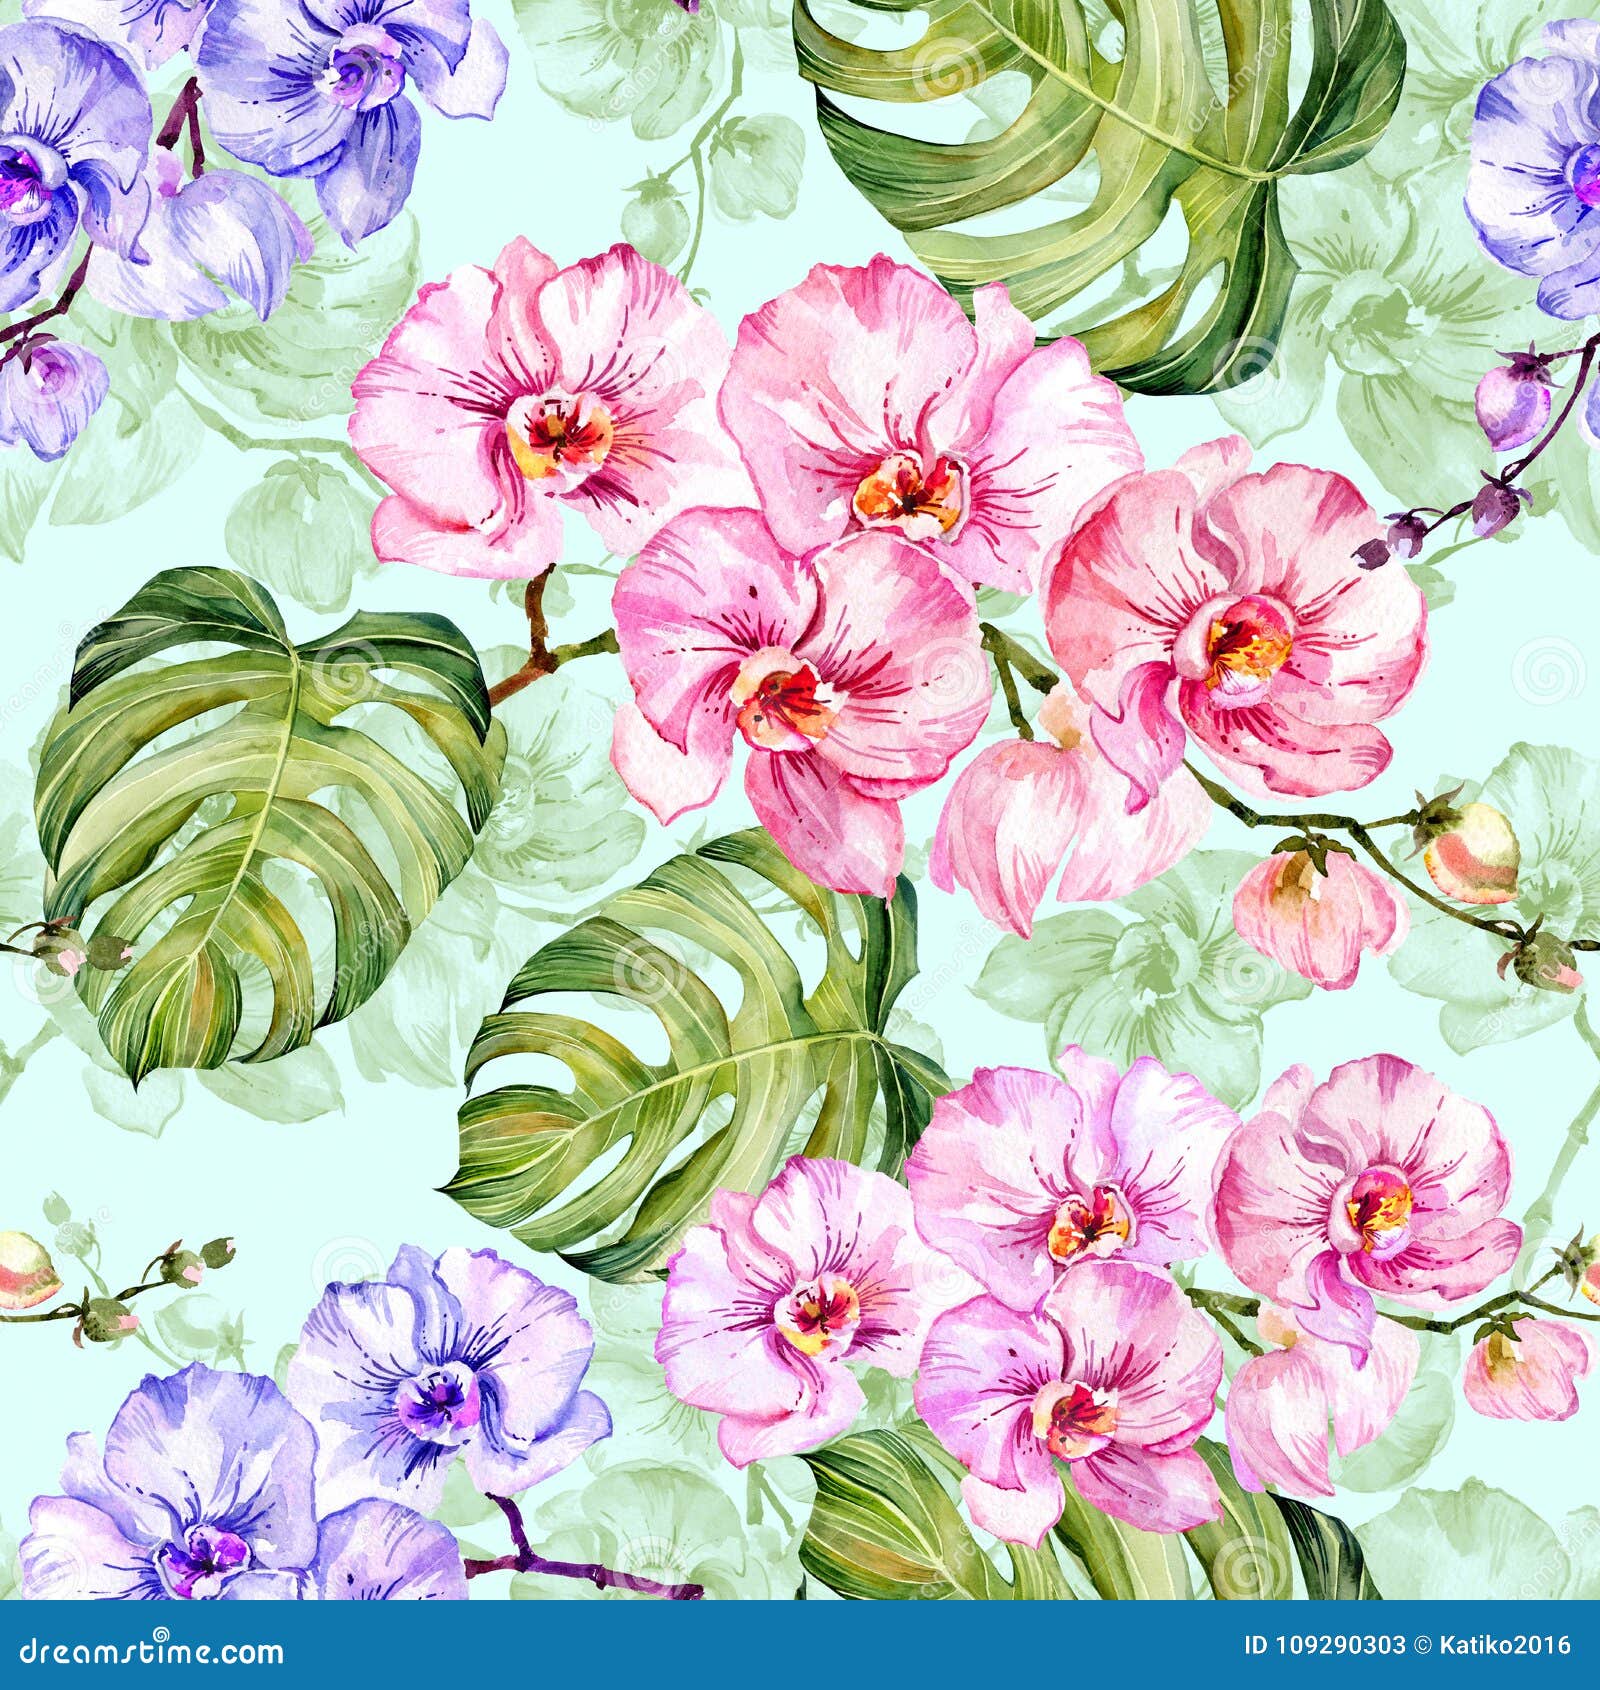 blue and pink orchid flowers with outlines and large green monstera leaves on light blue background. seamless pattern.